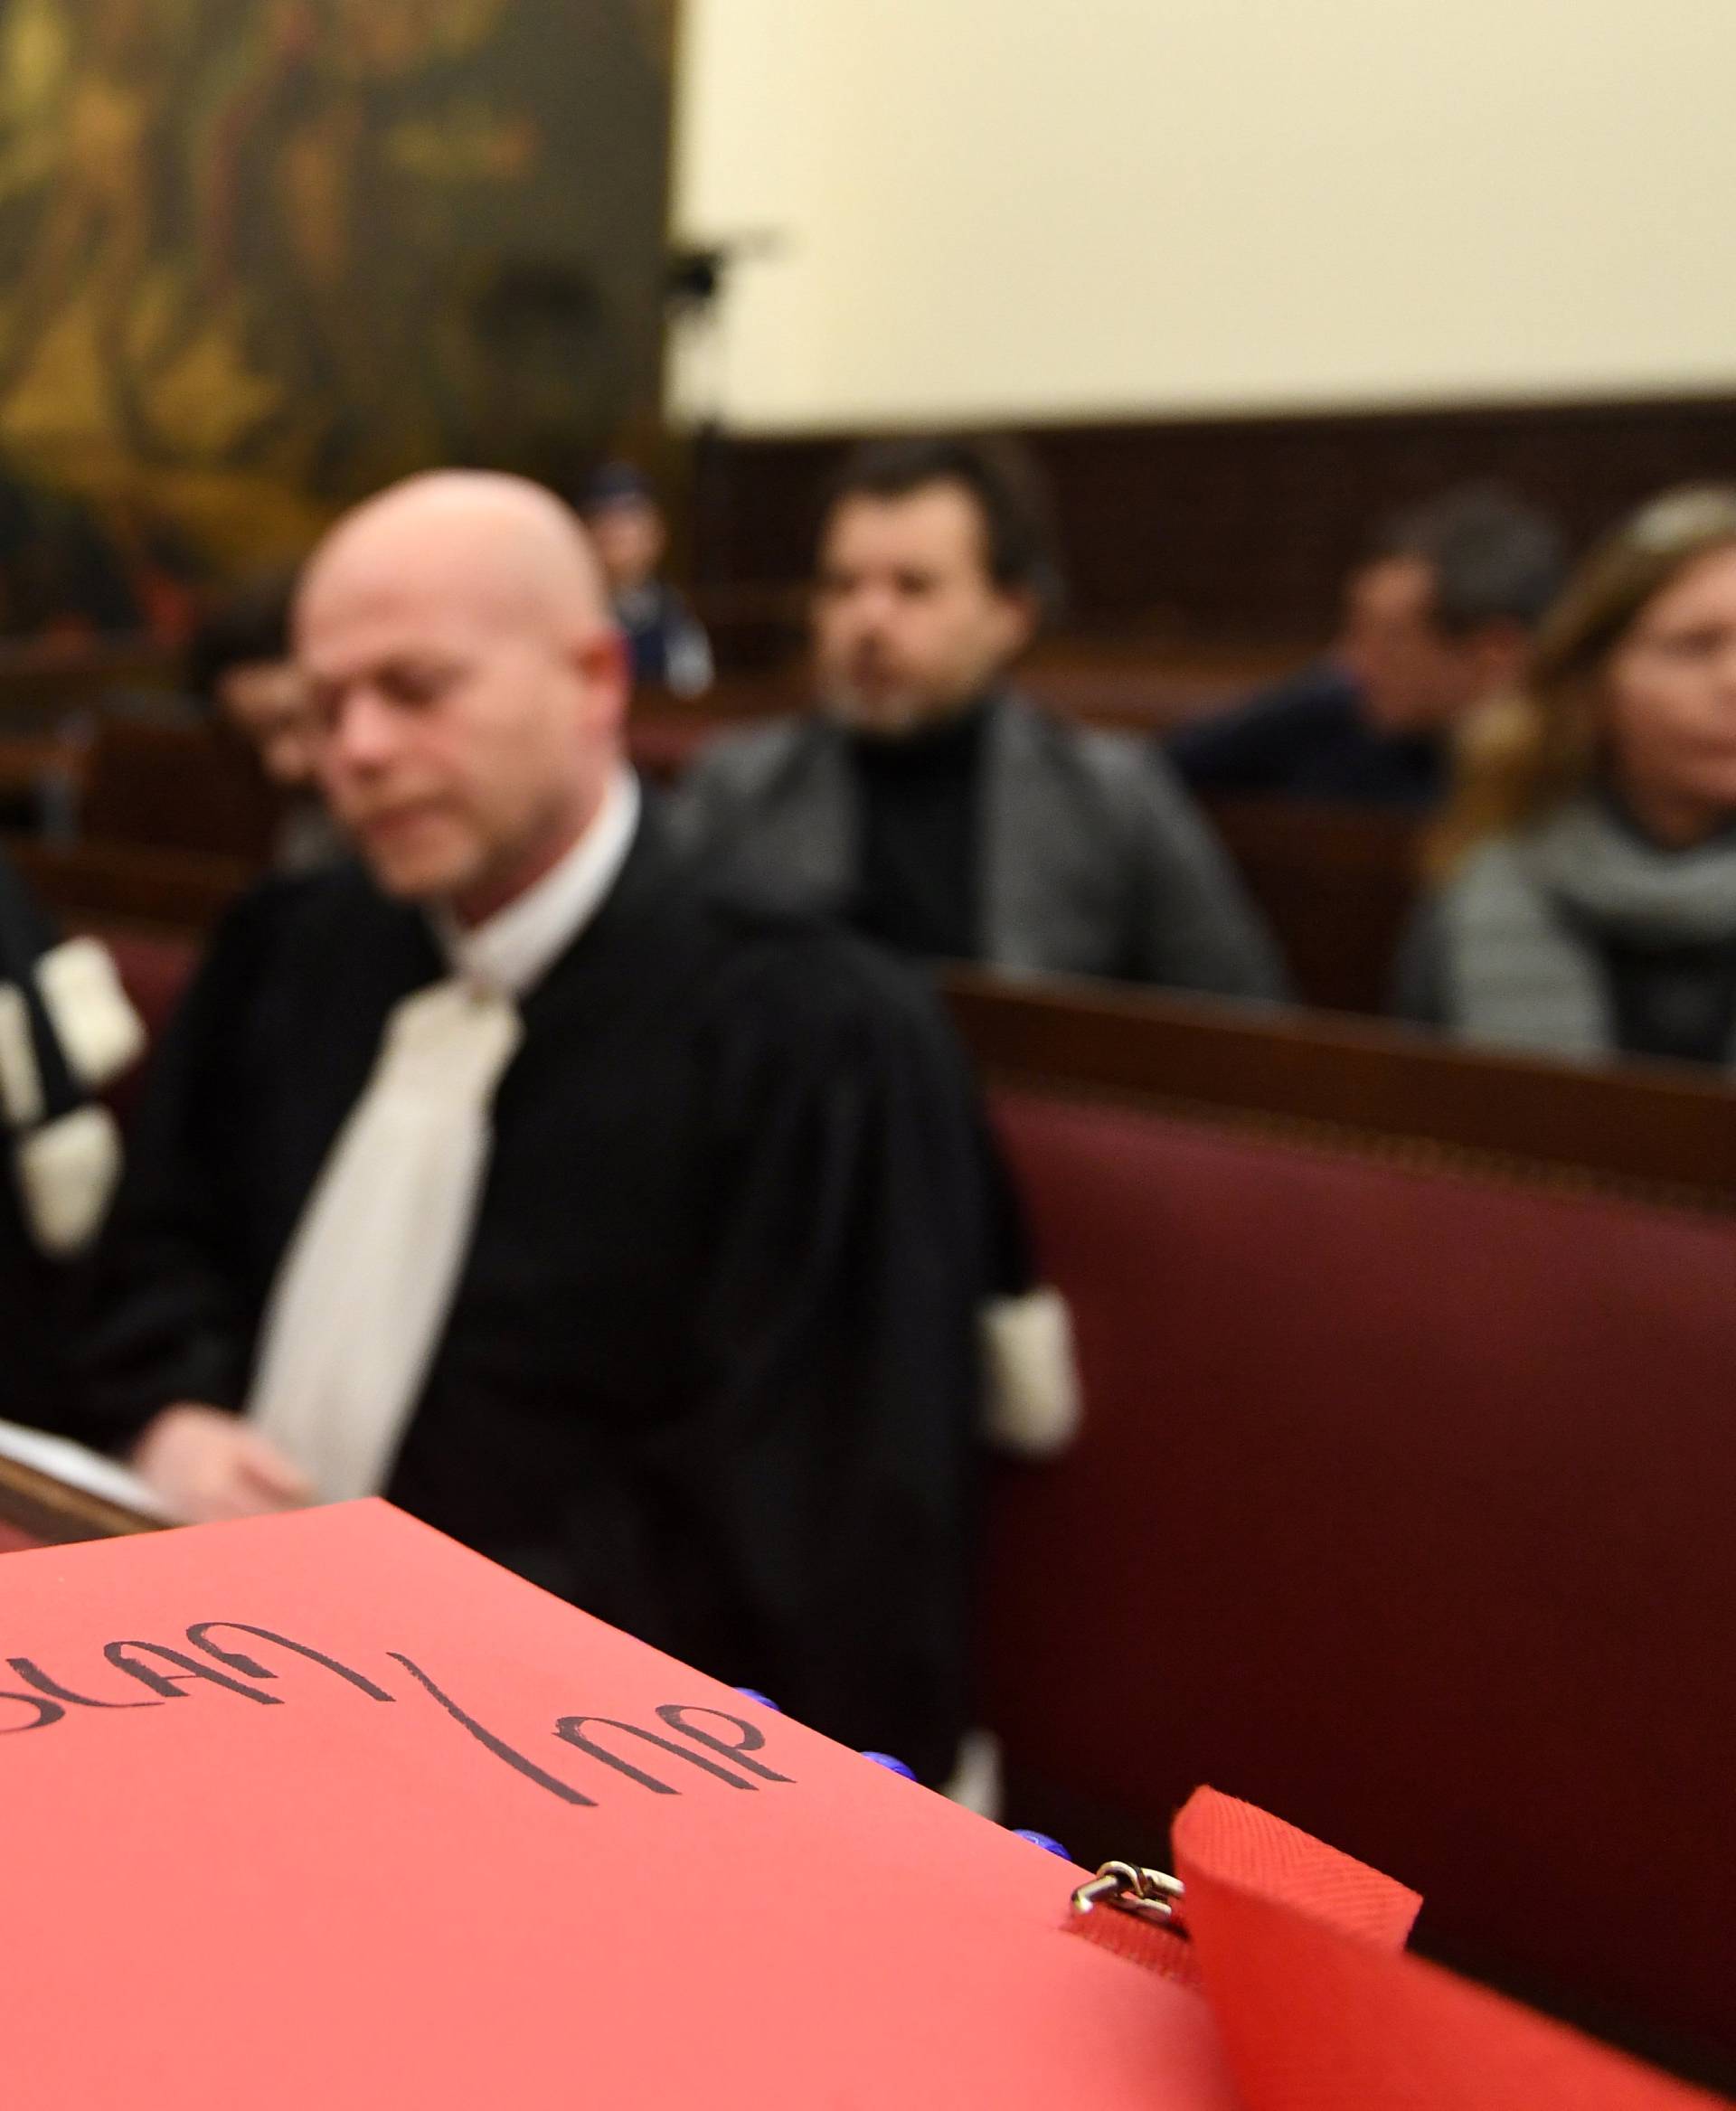 Belgian lawyers representing Paris attacks suspect Salah Abdeslam Mary and Delcoigne look on in the courtroom prior to the opening of the trial of Salah Abdeslam in Brussels